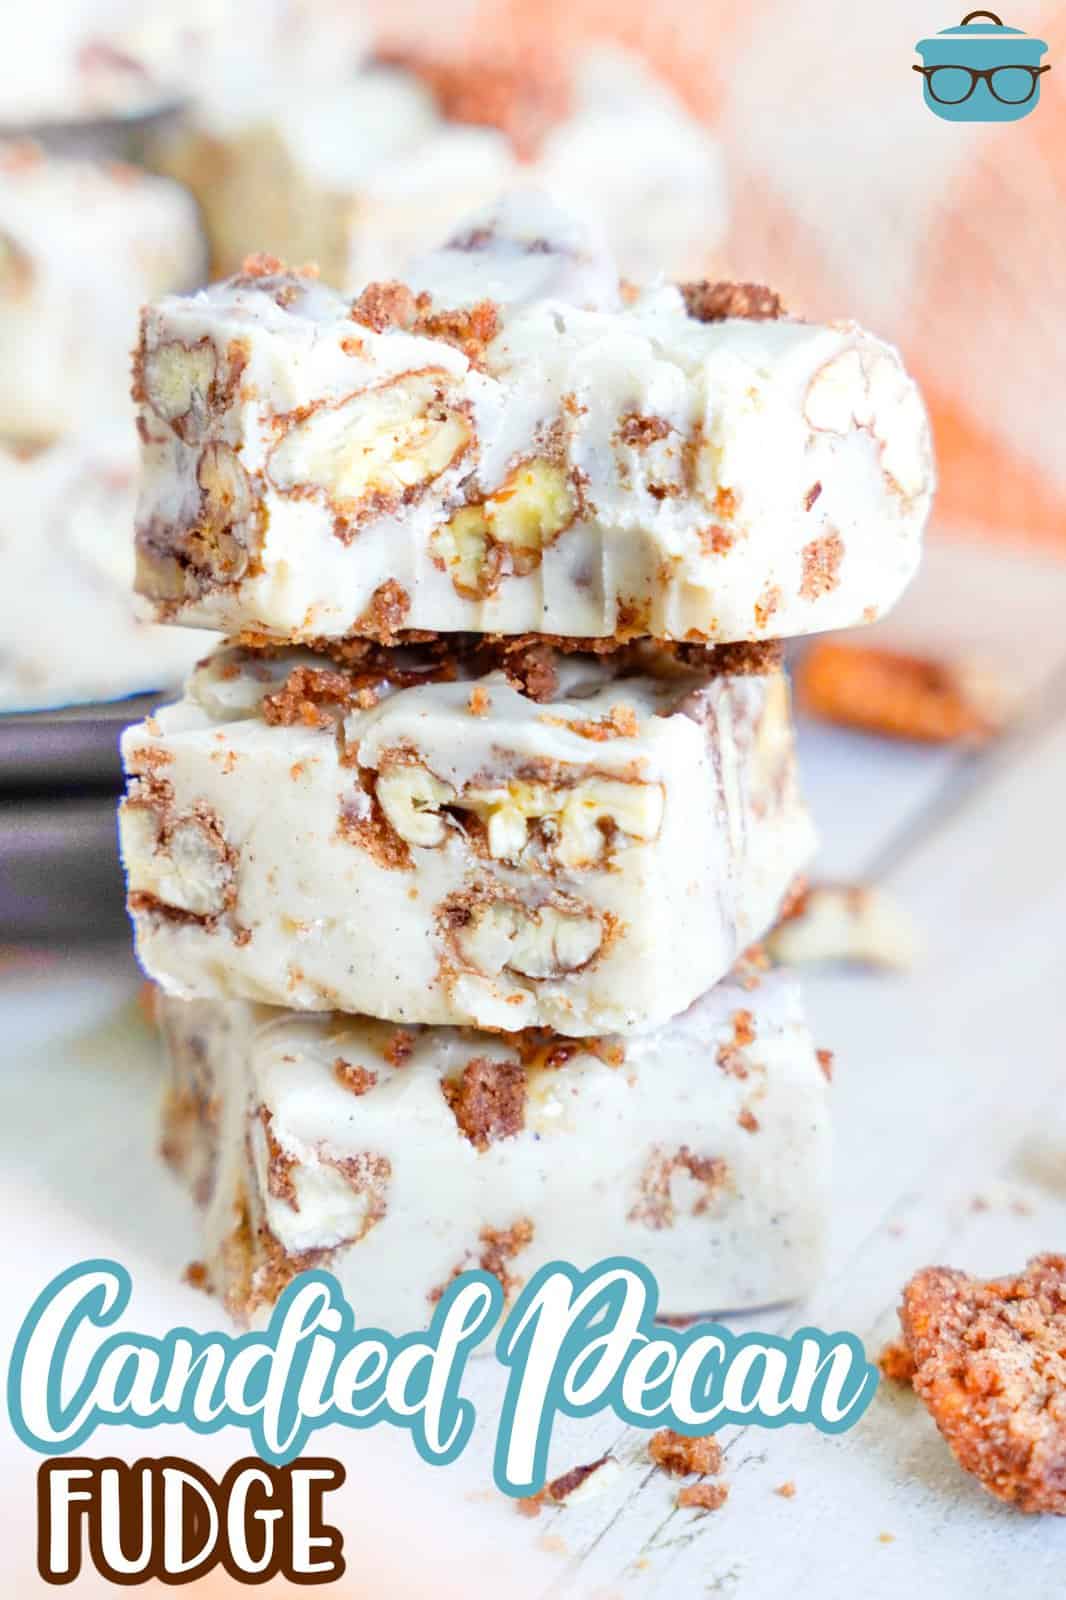 A stack of Candied Pecan Fudge.